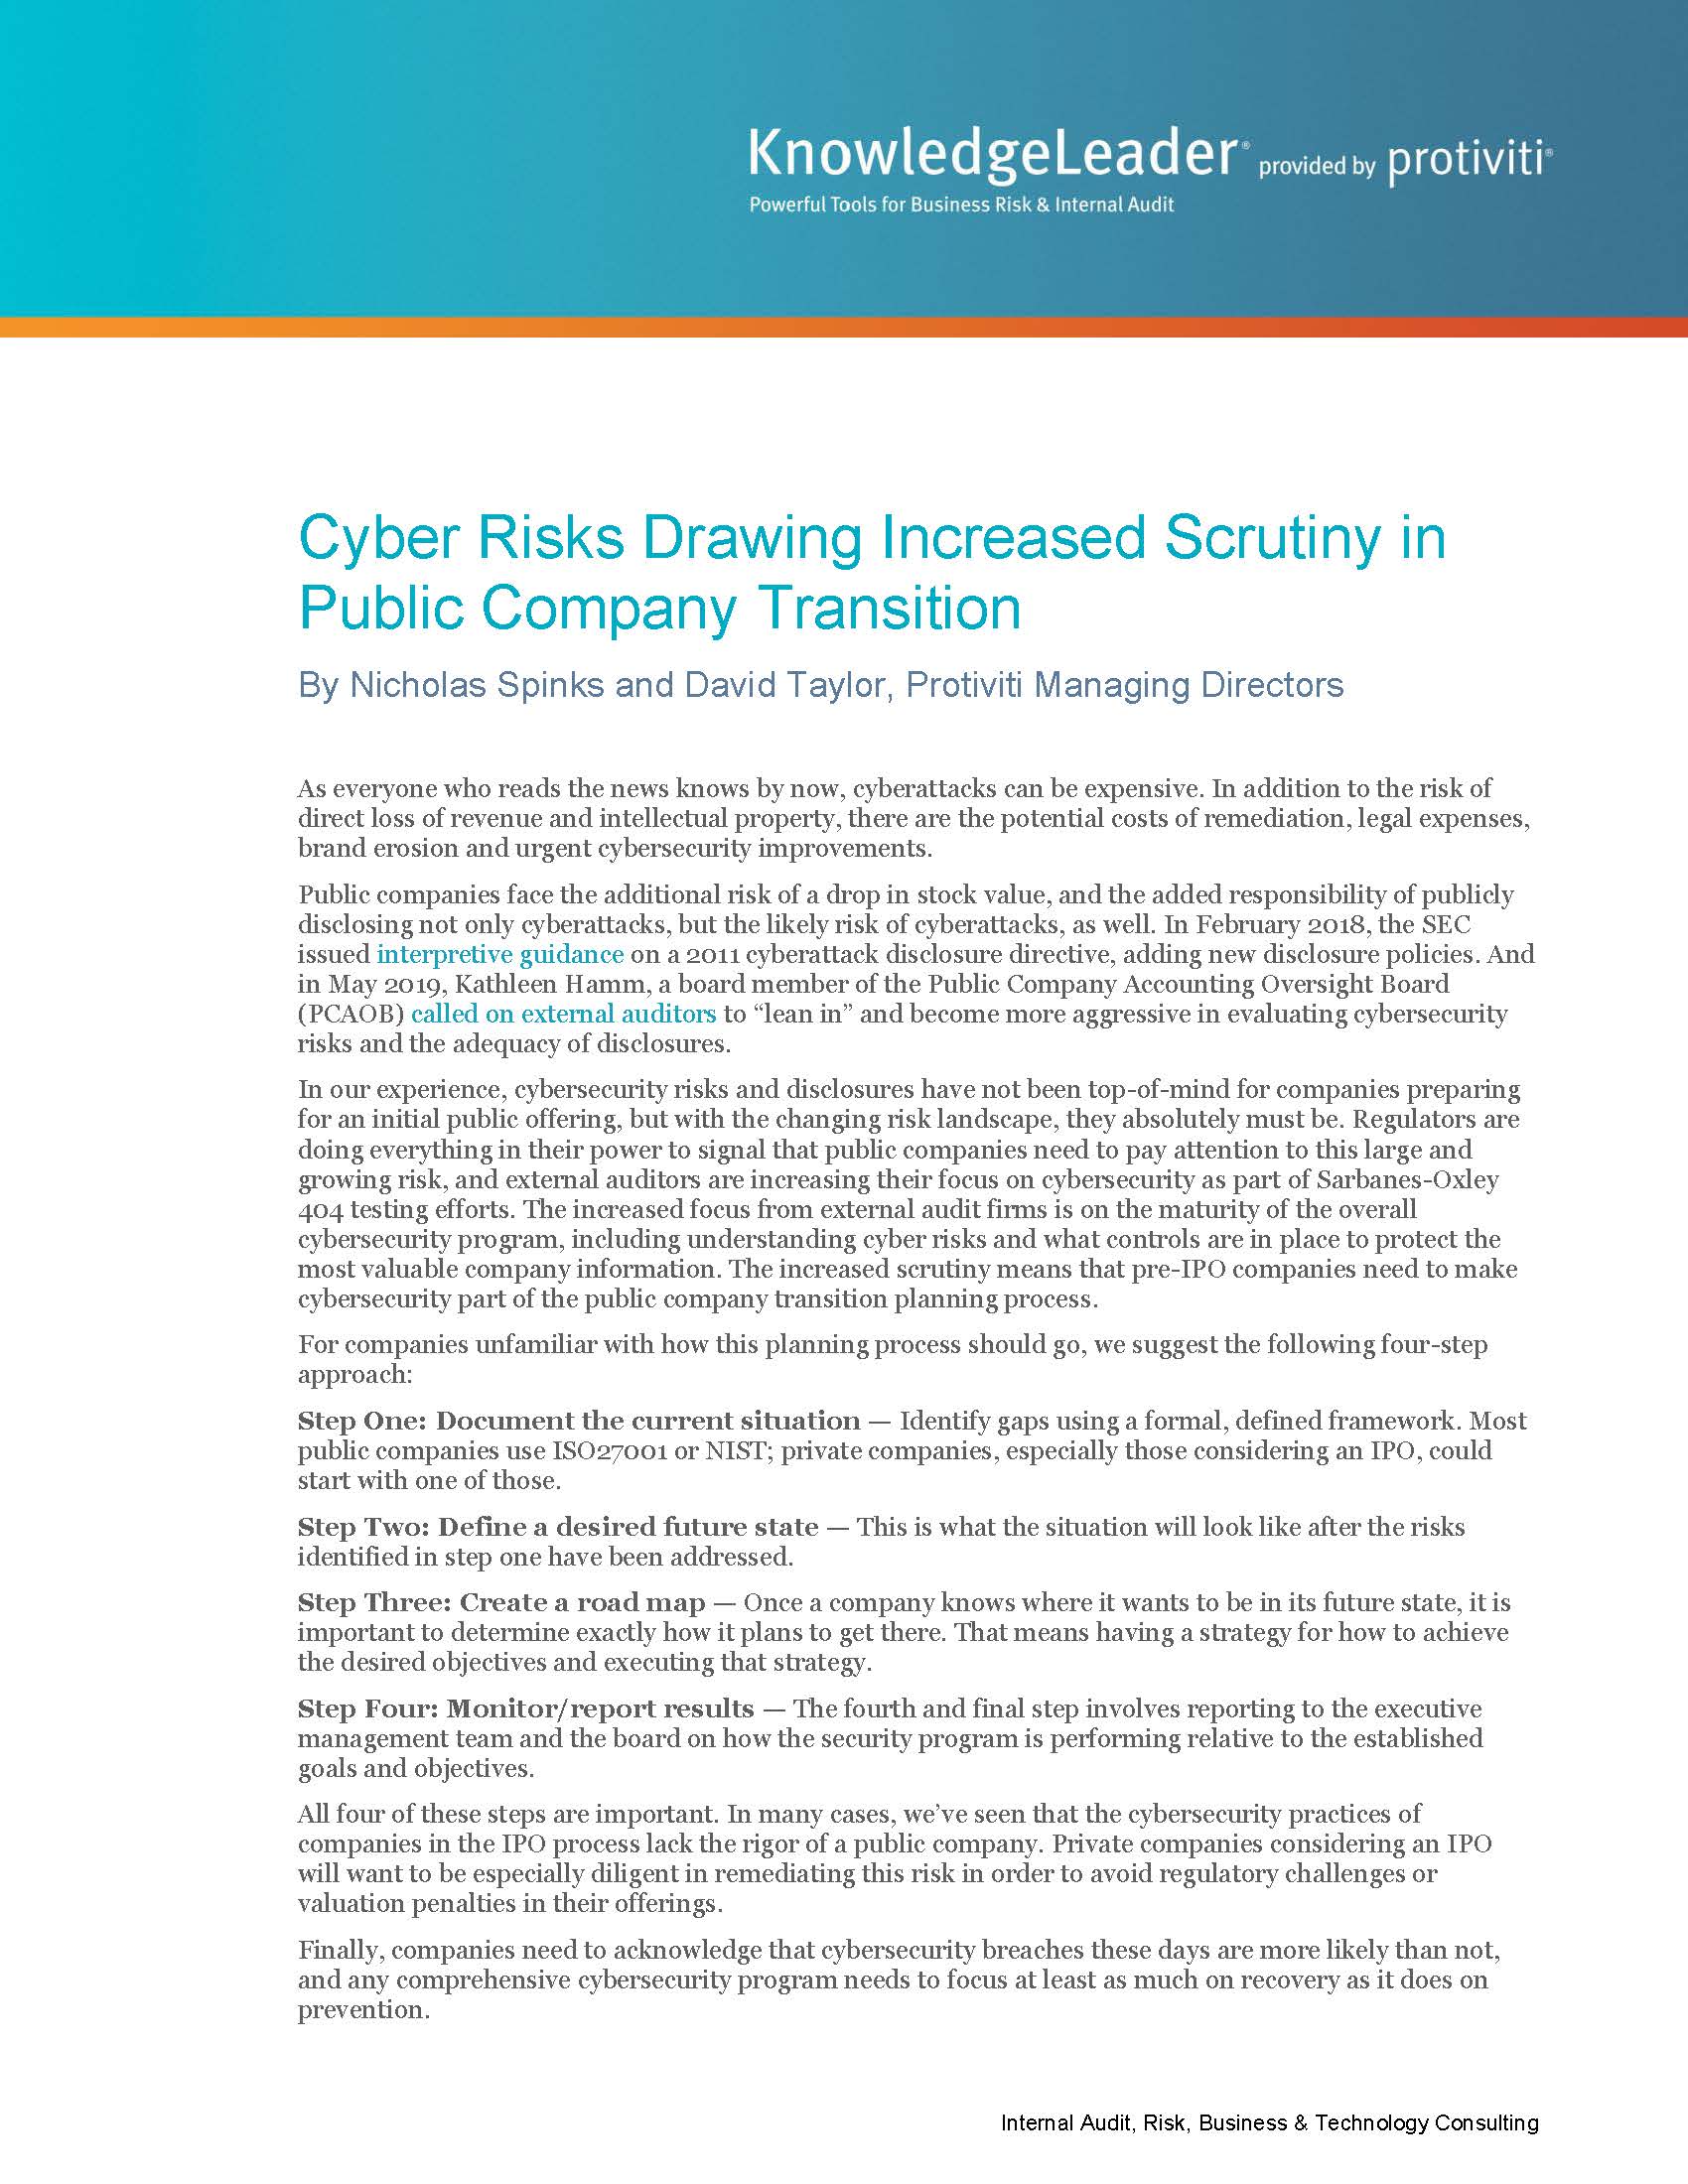 Screenshot of the first page of Cyber Risks Drawing Increased Scrutiny in Public Company Transition